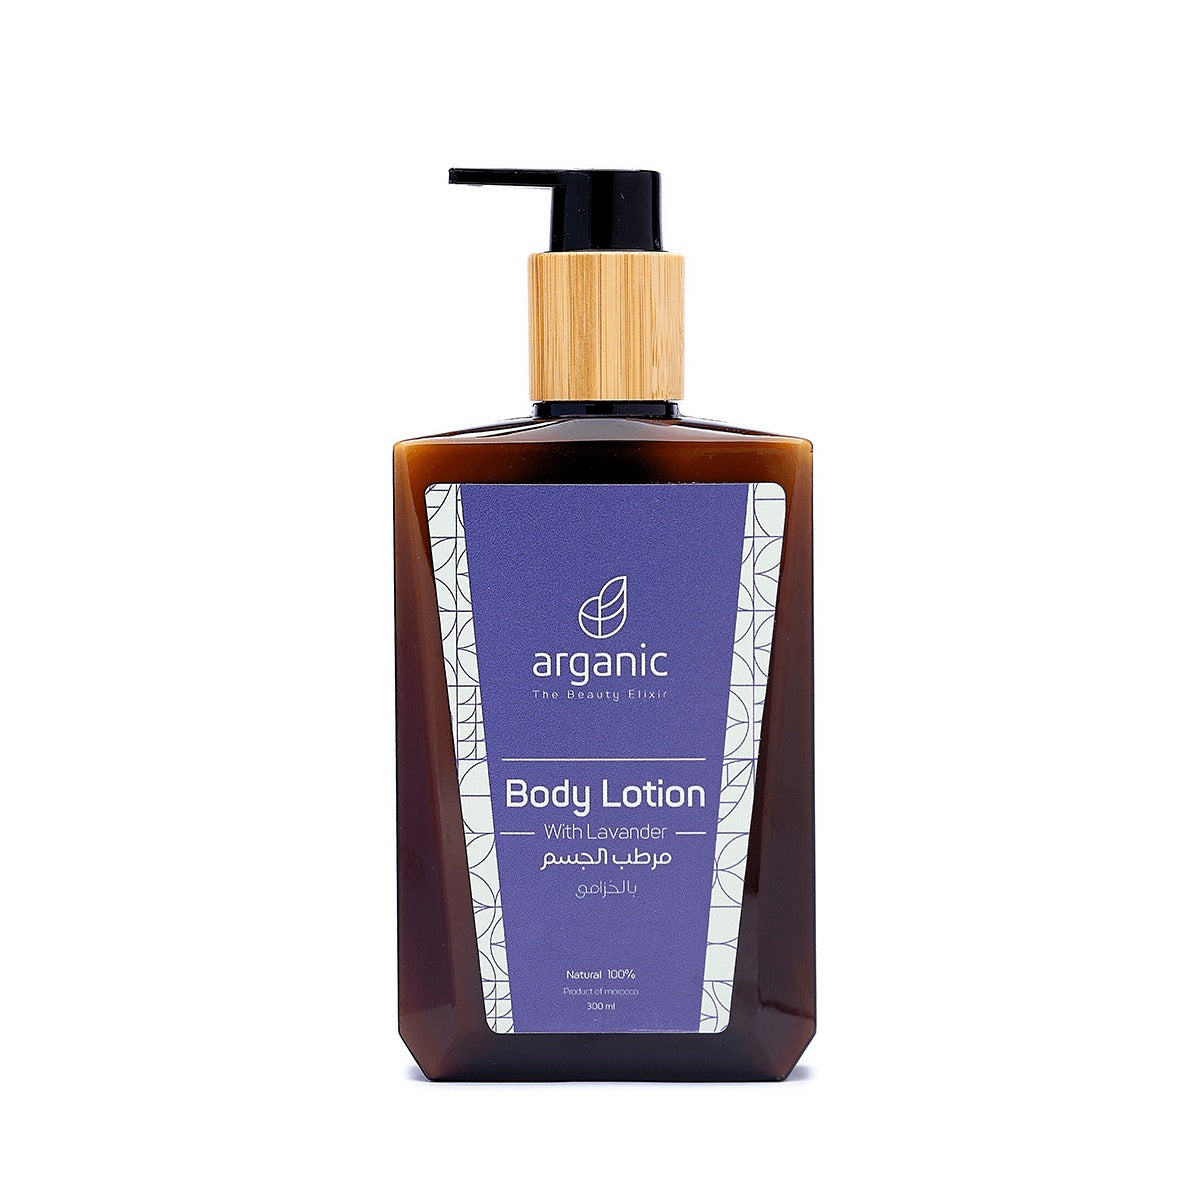 Arganic body lotion with lavender in brown pump bottle on white